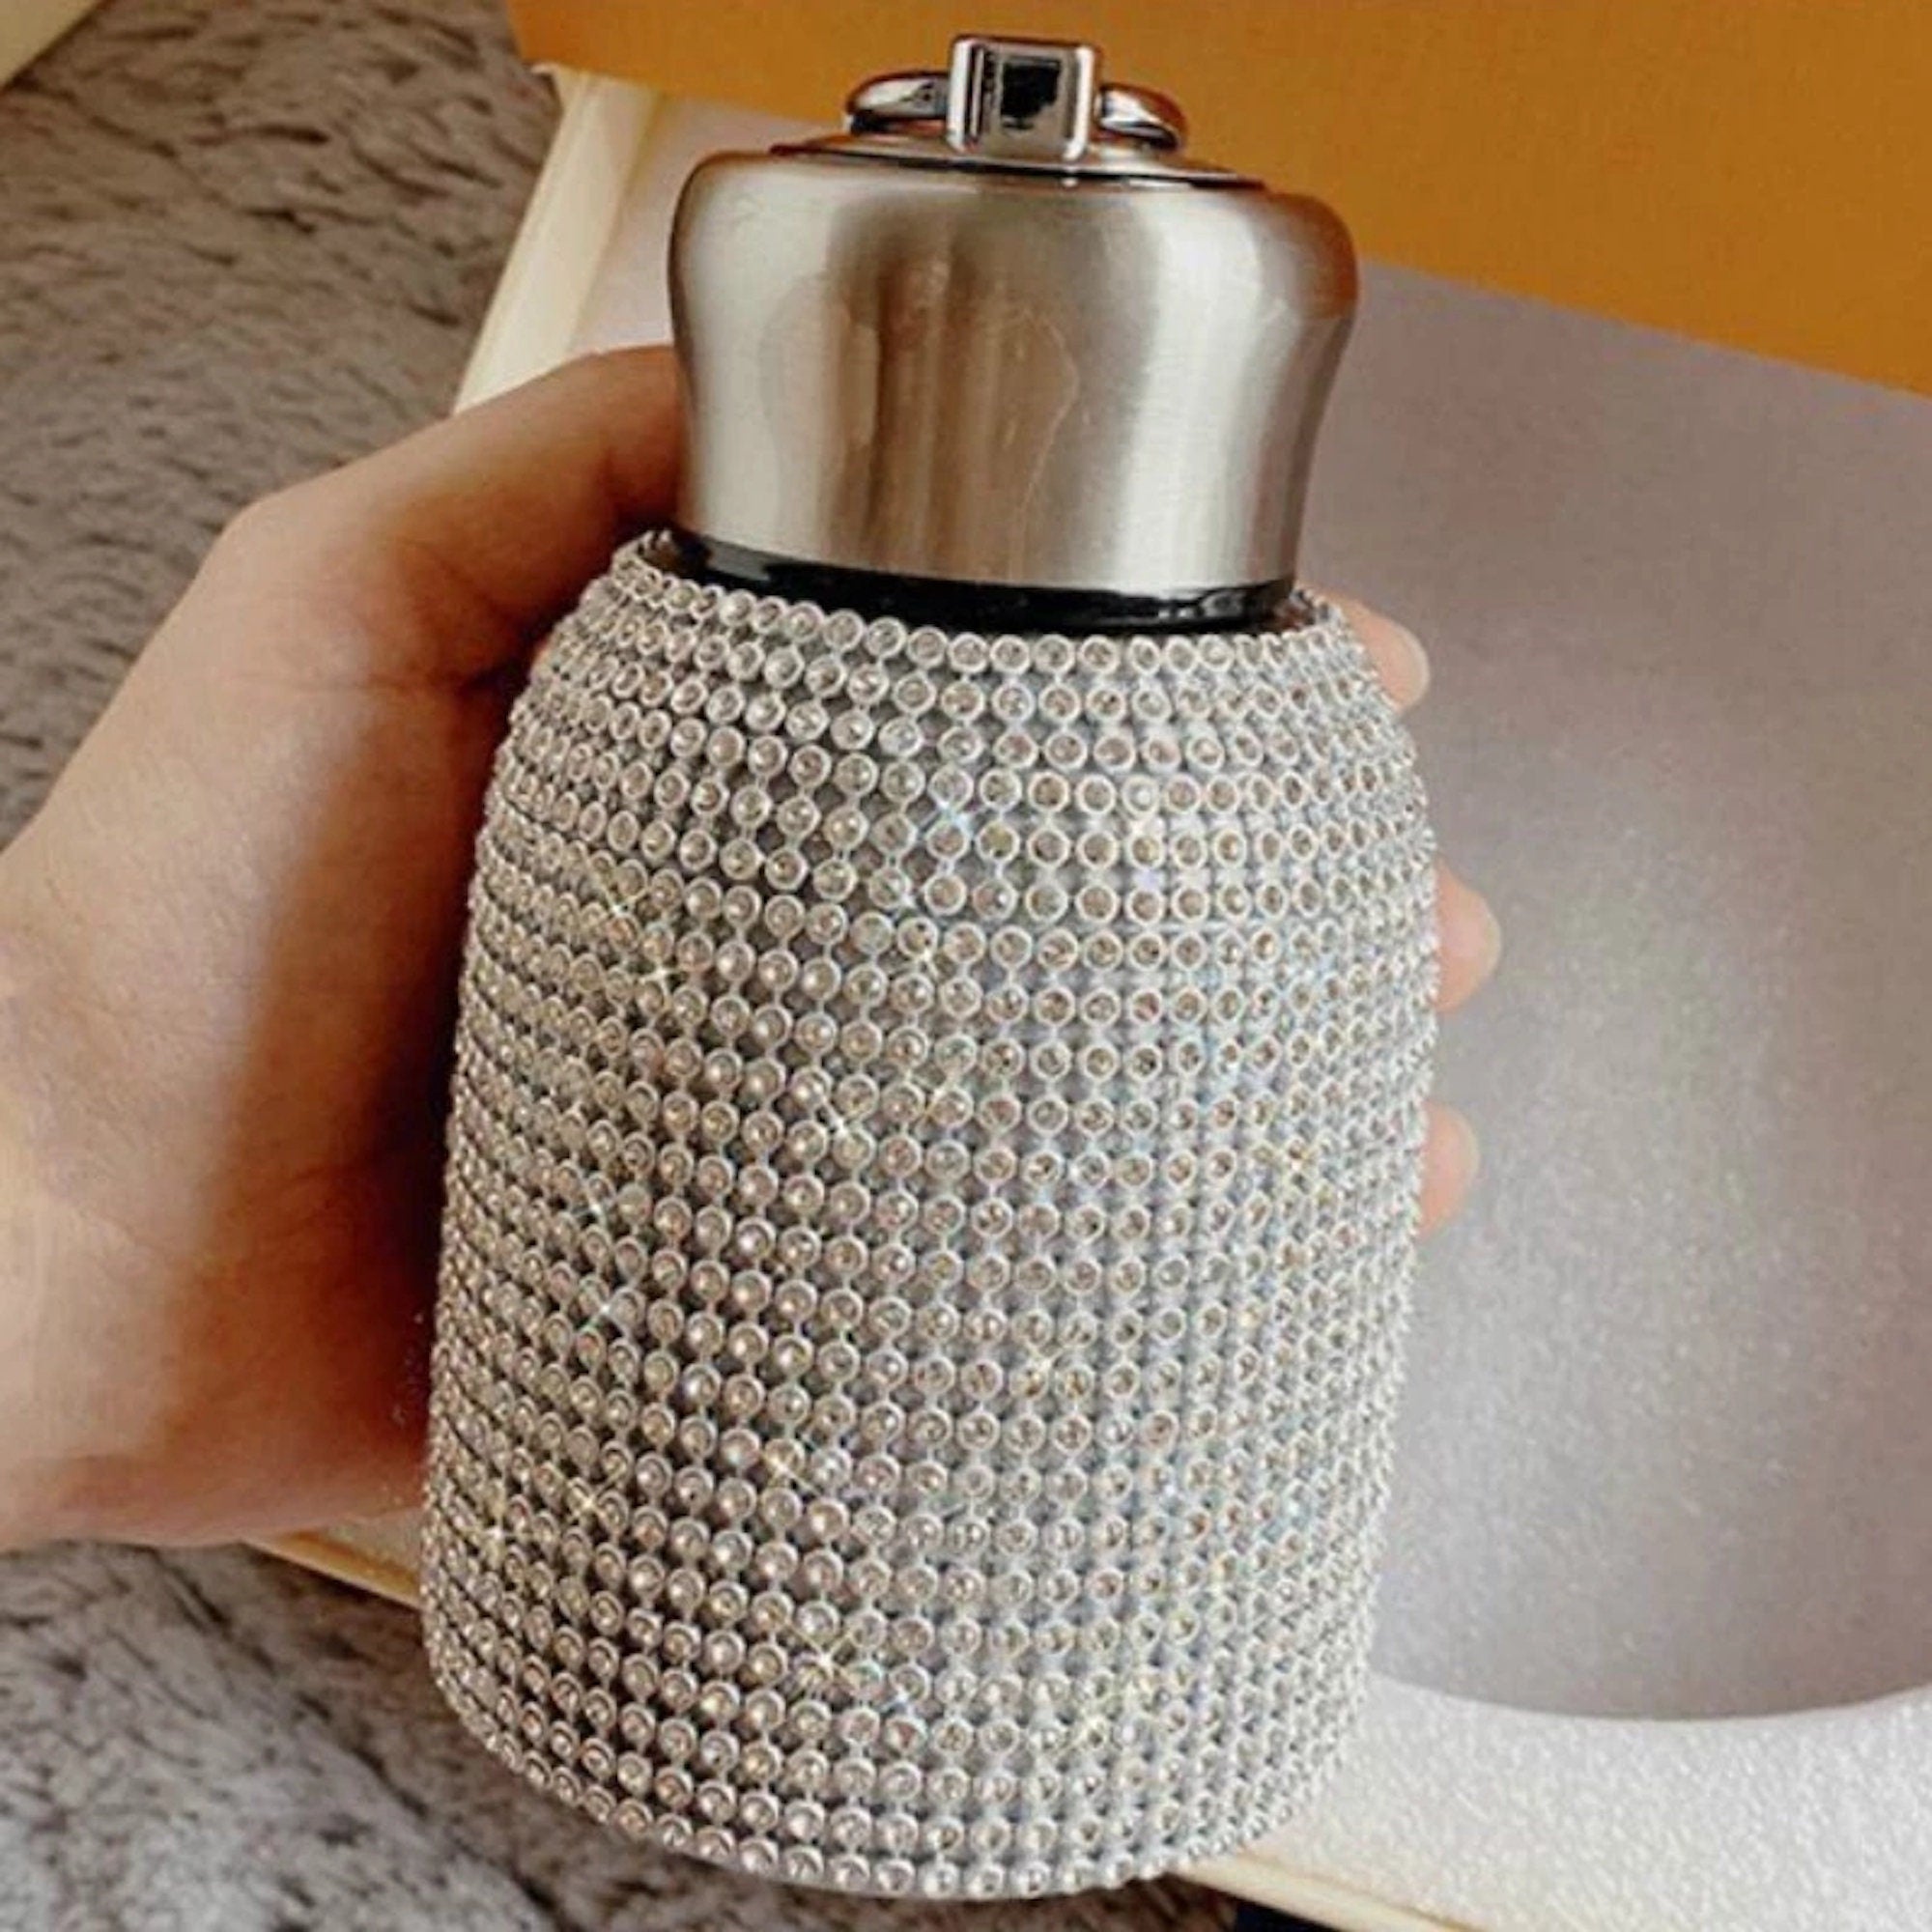 Thermos Unique Gift Rhinestone Studded 250ml High Fashion Water Bottle With Long Cross Body Carrying Chain Stainless Steel Hot and Cold Lid  34.99 Indigo Paisley